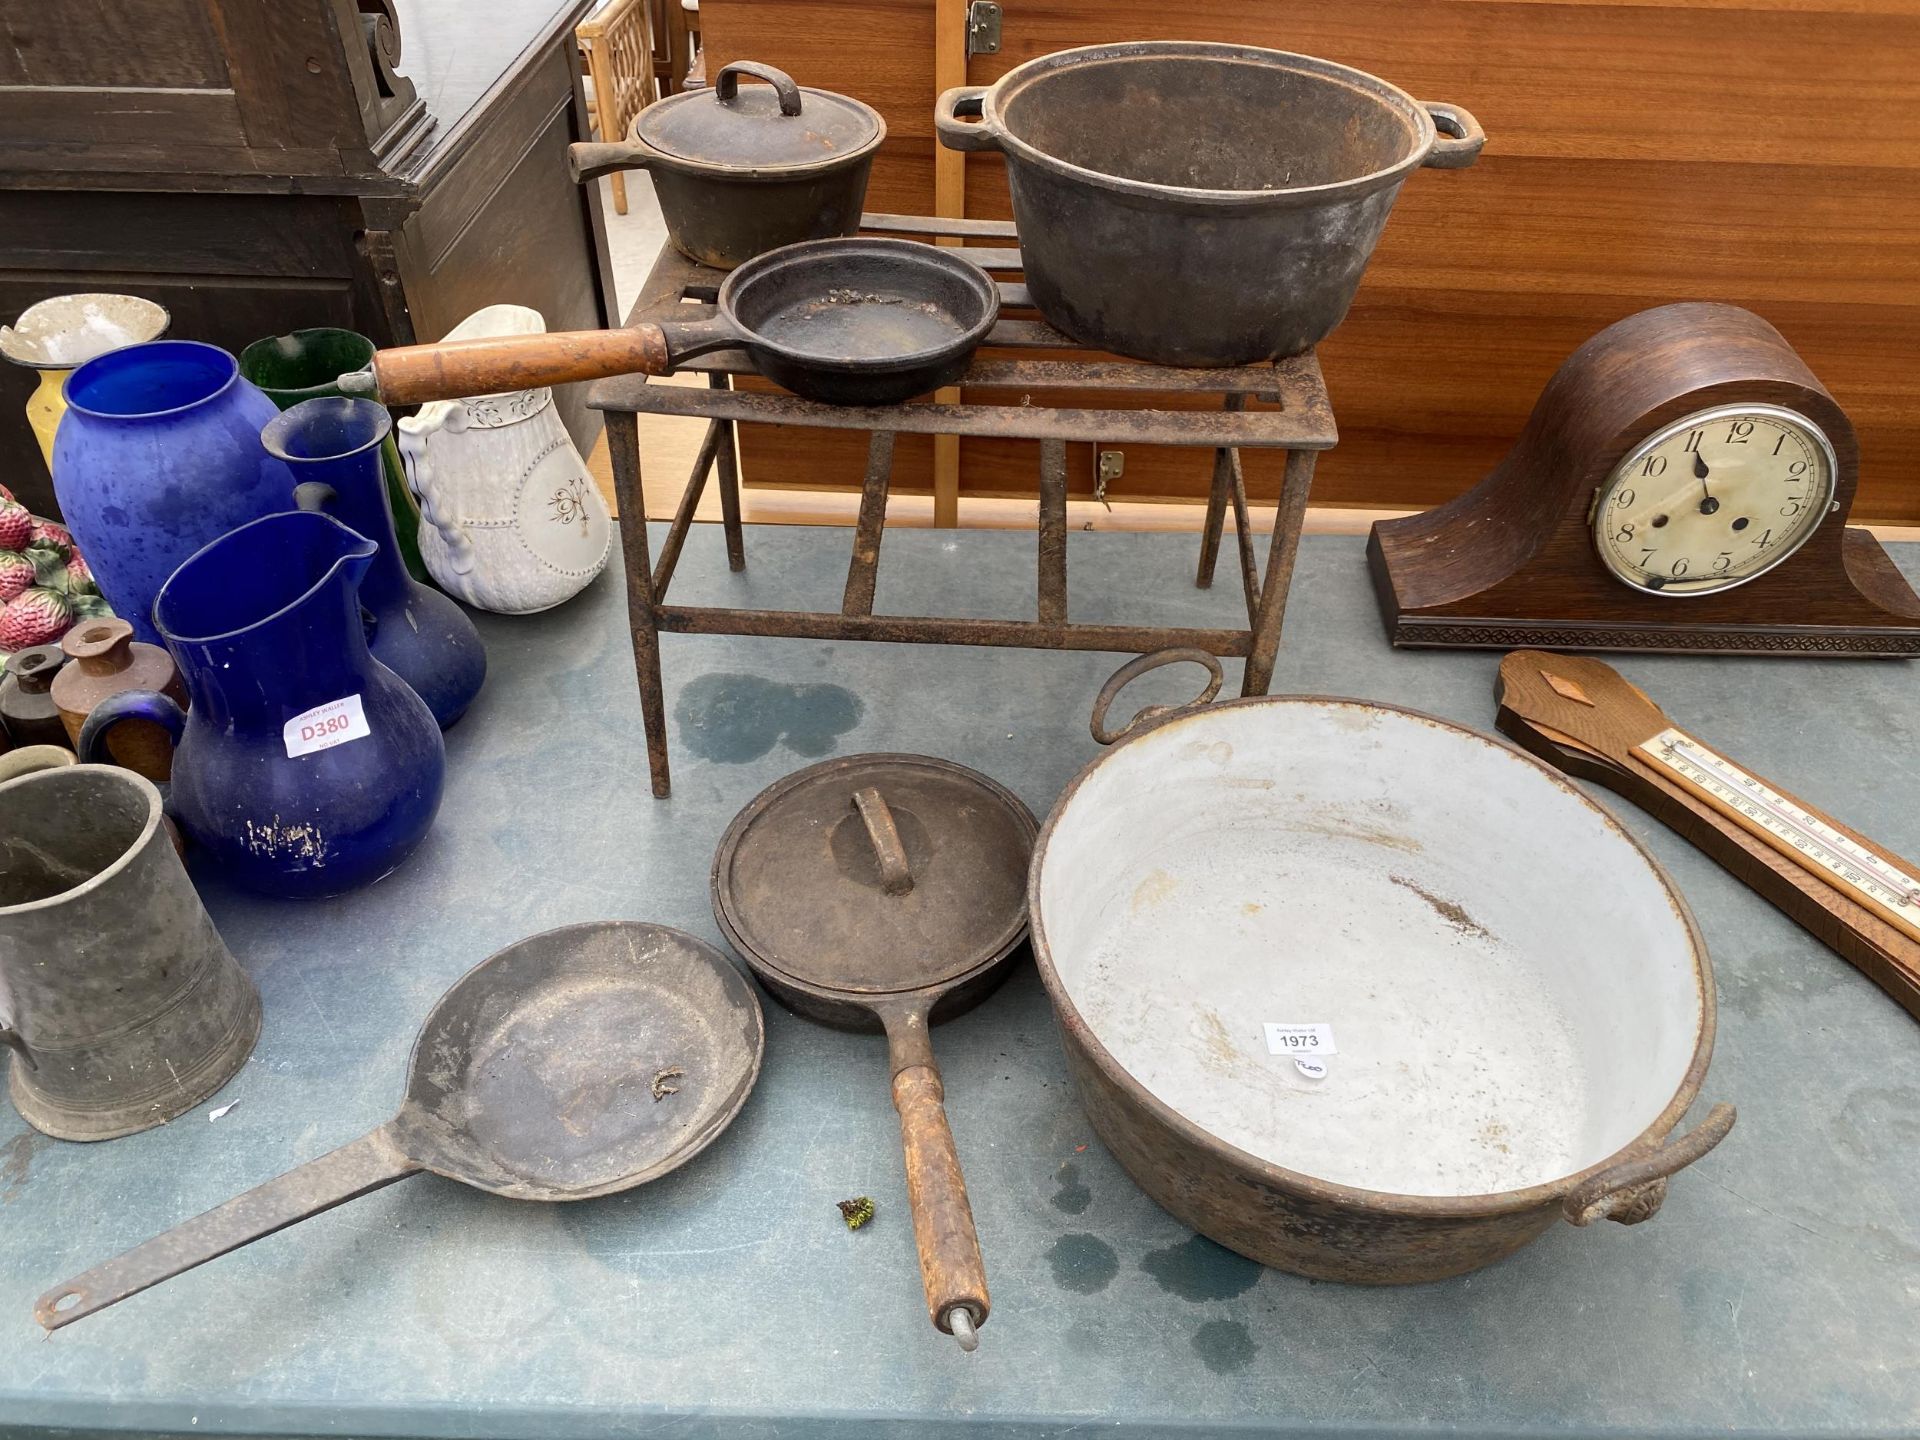 A MIXED LOT OF CAST KITCHEN PANS, STAND ETC